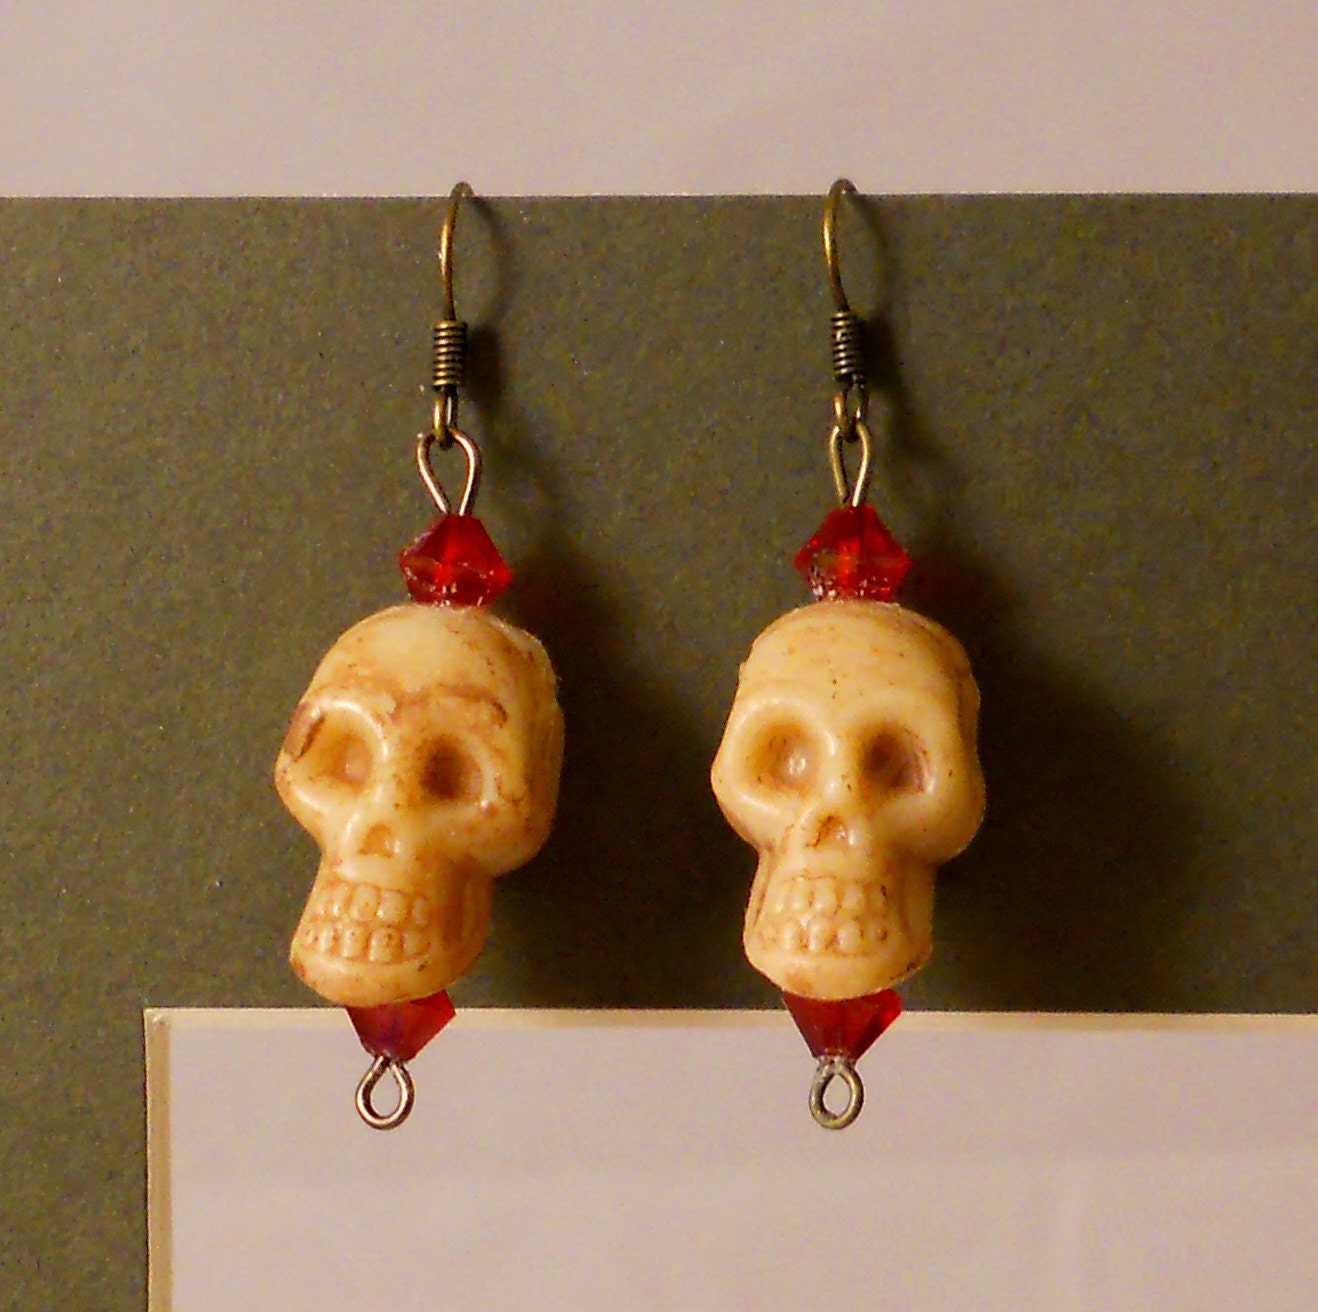 Blood Red SWAROVSKI Crystals and SKULLS Dangling Earrings -- 3D Halloween Gothic Jewelry Bones Beaded Steampunk